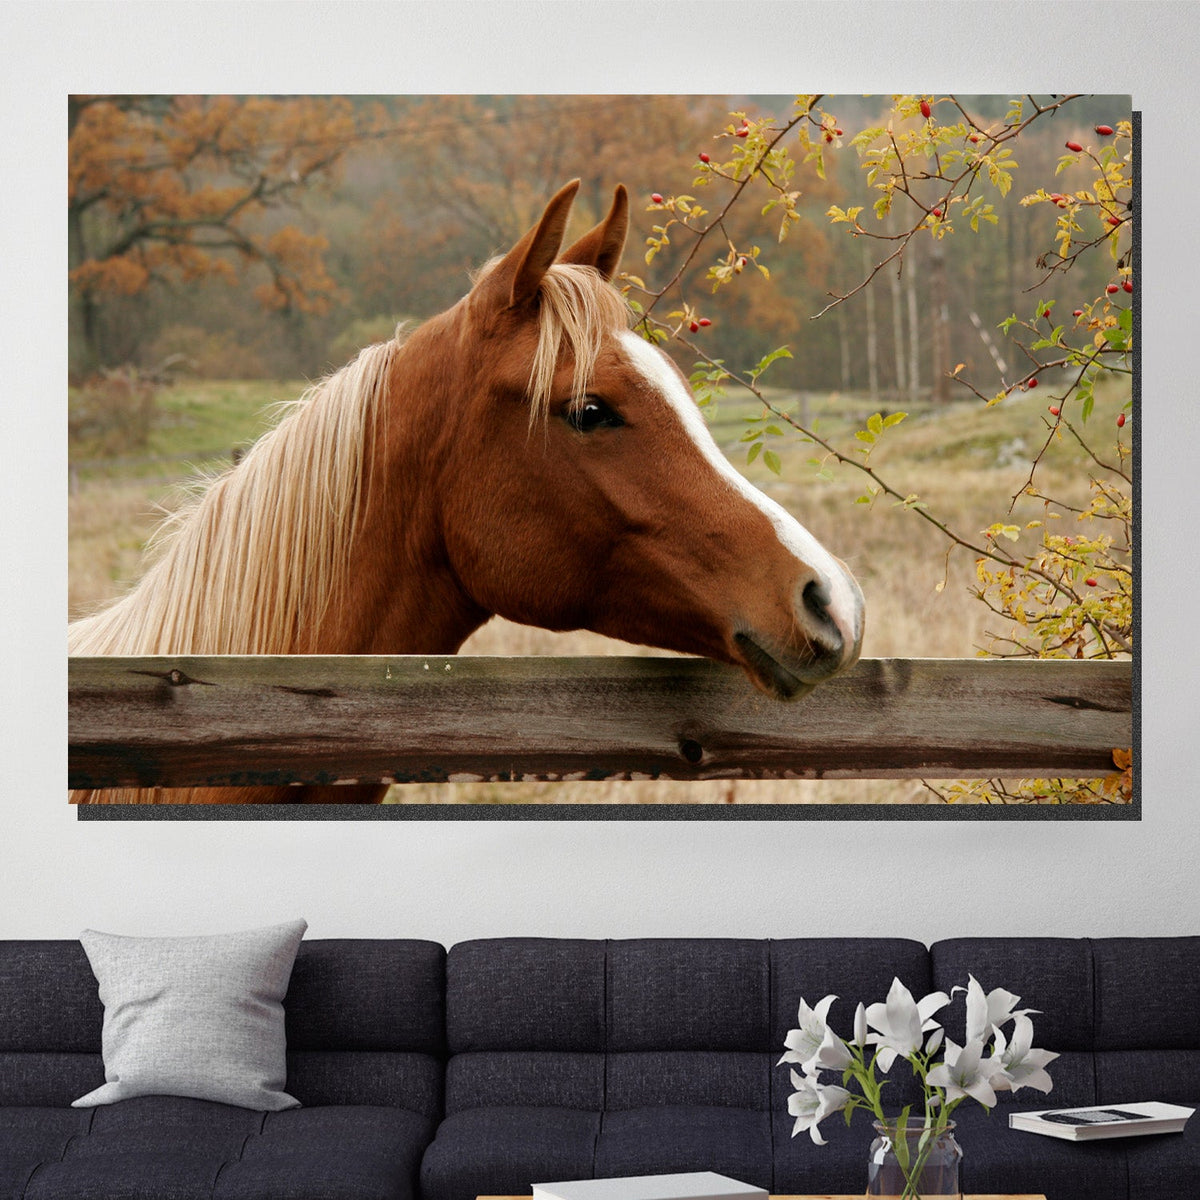 https://cdn.shopify.com/s/files/1/0387/9986/8044/products/CountryHorseCanvasArtprintStretched-4.jpg